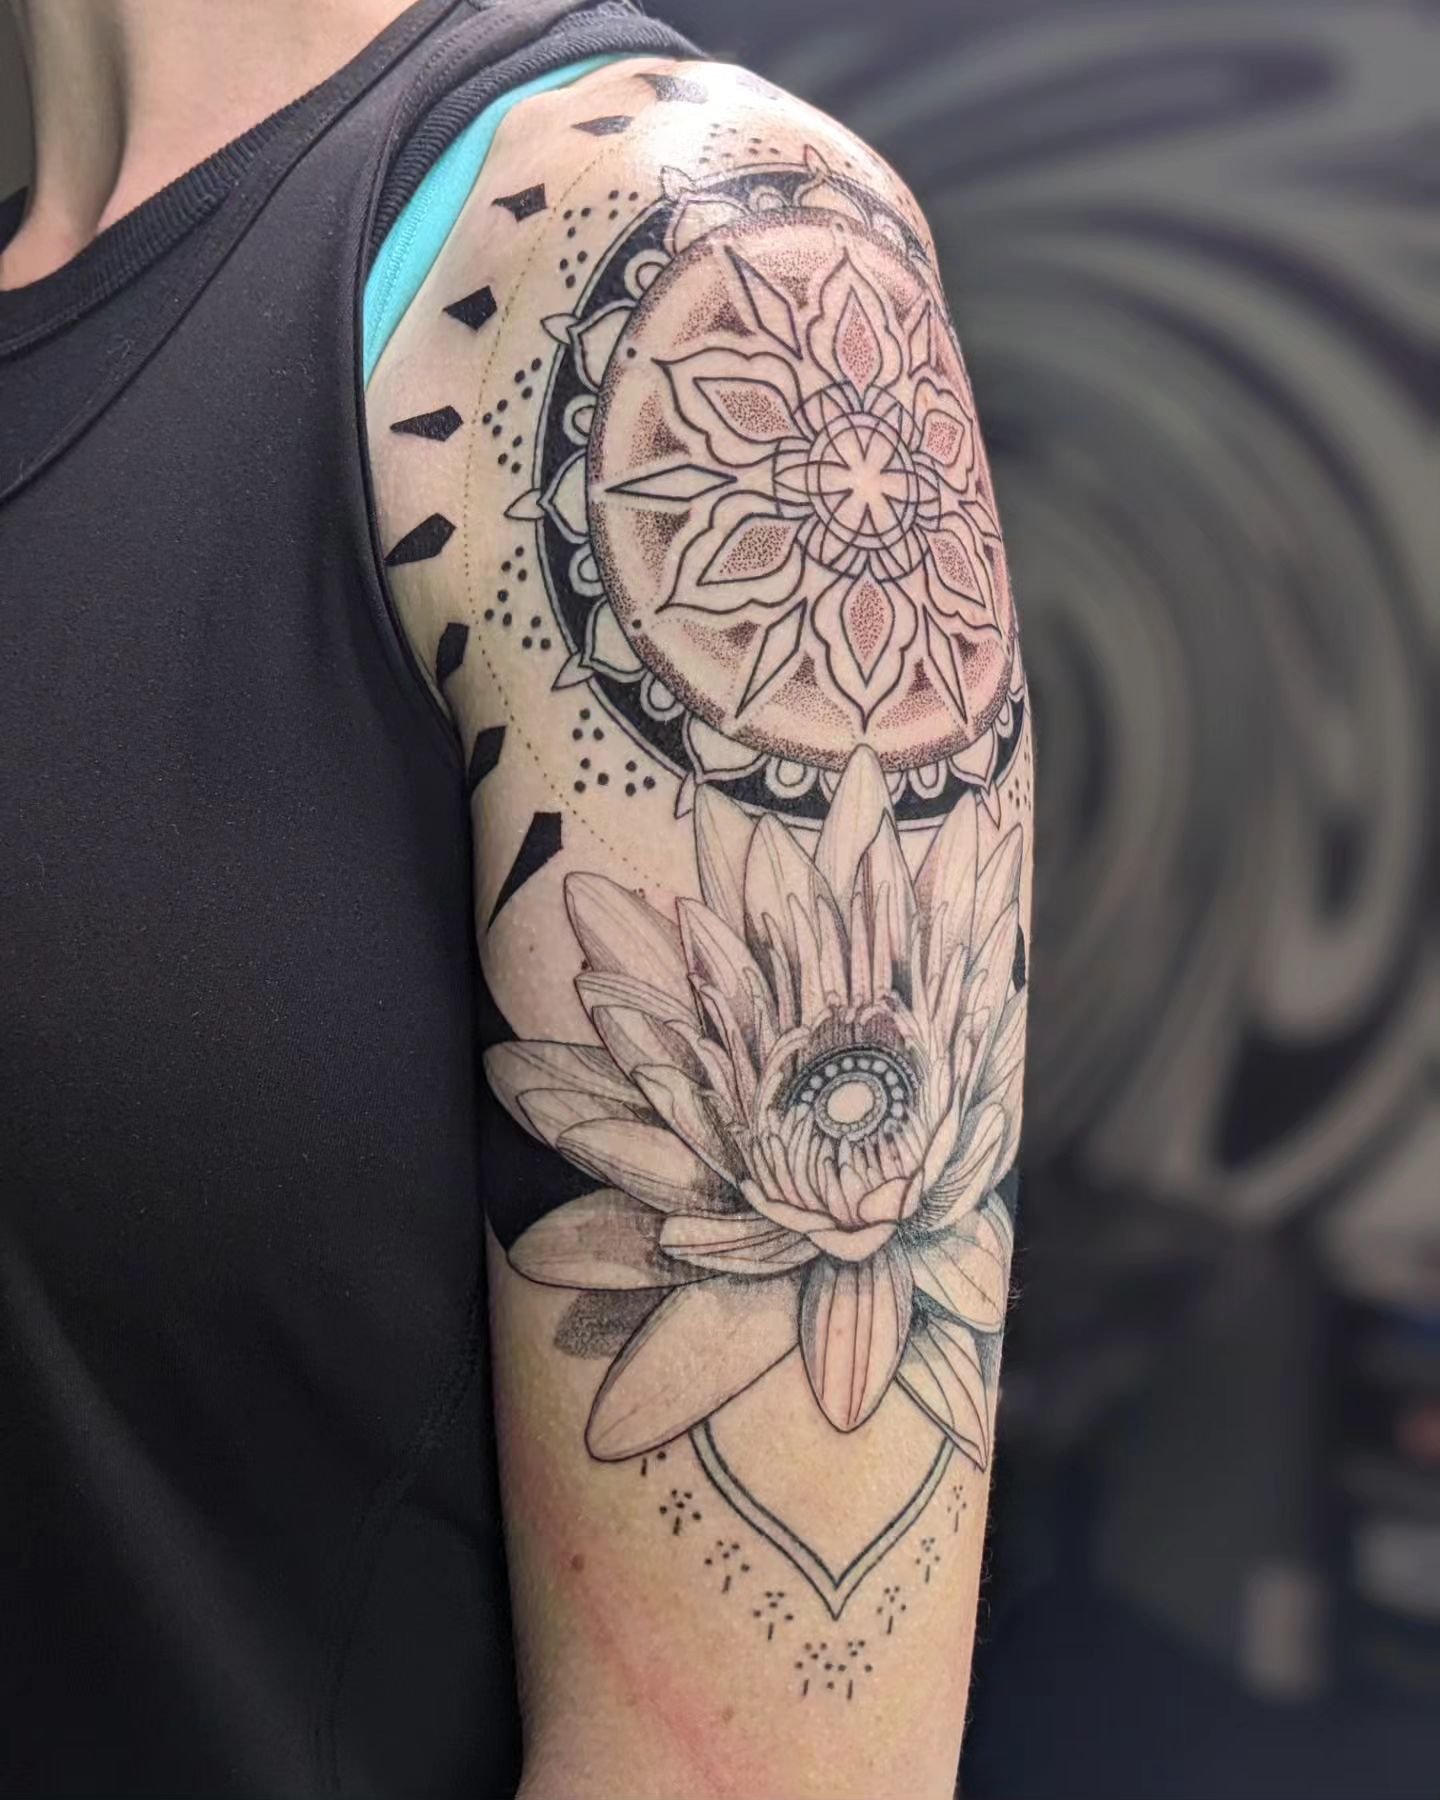 Some work in progress for @lettheladyb 🙌🏽 
.
I need a new camera, my pics are starting to look a little dusty. But I love the progress on this piece for Blair, and wanted to share it. 
.
Started @utopiatattooshop
.
#blackwork #floraltattoos #lotust